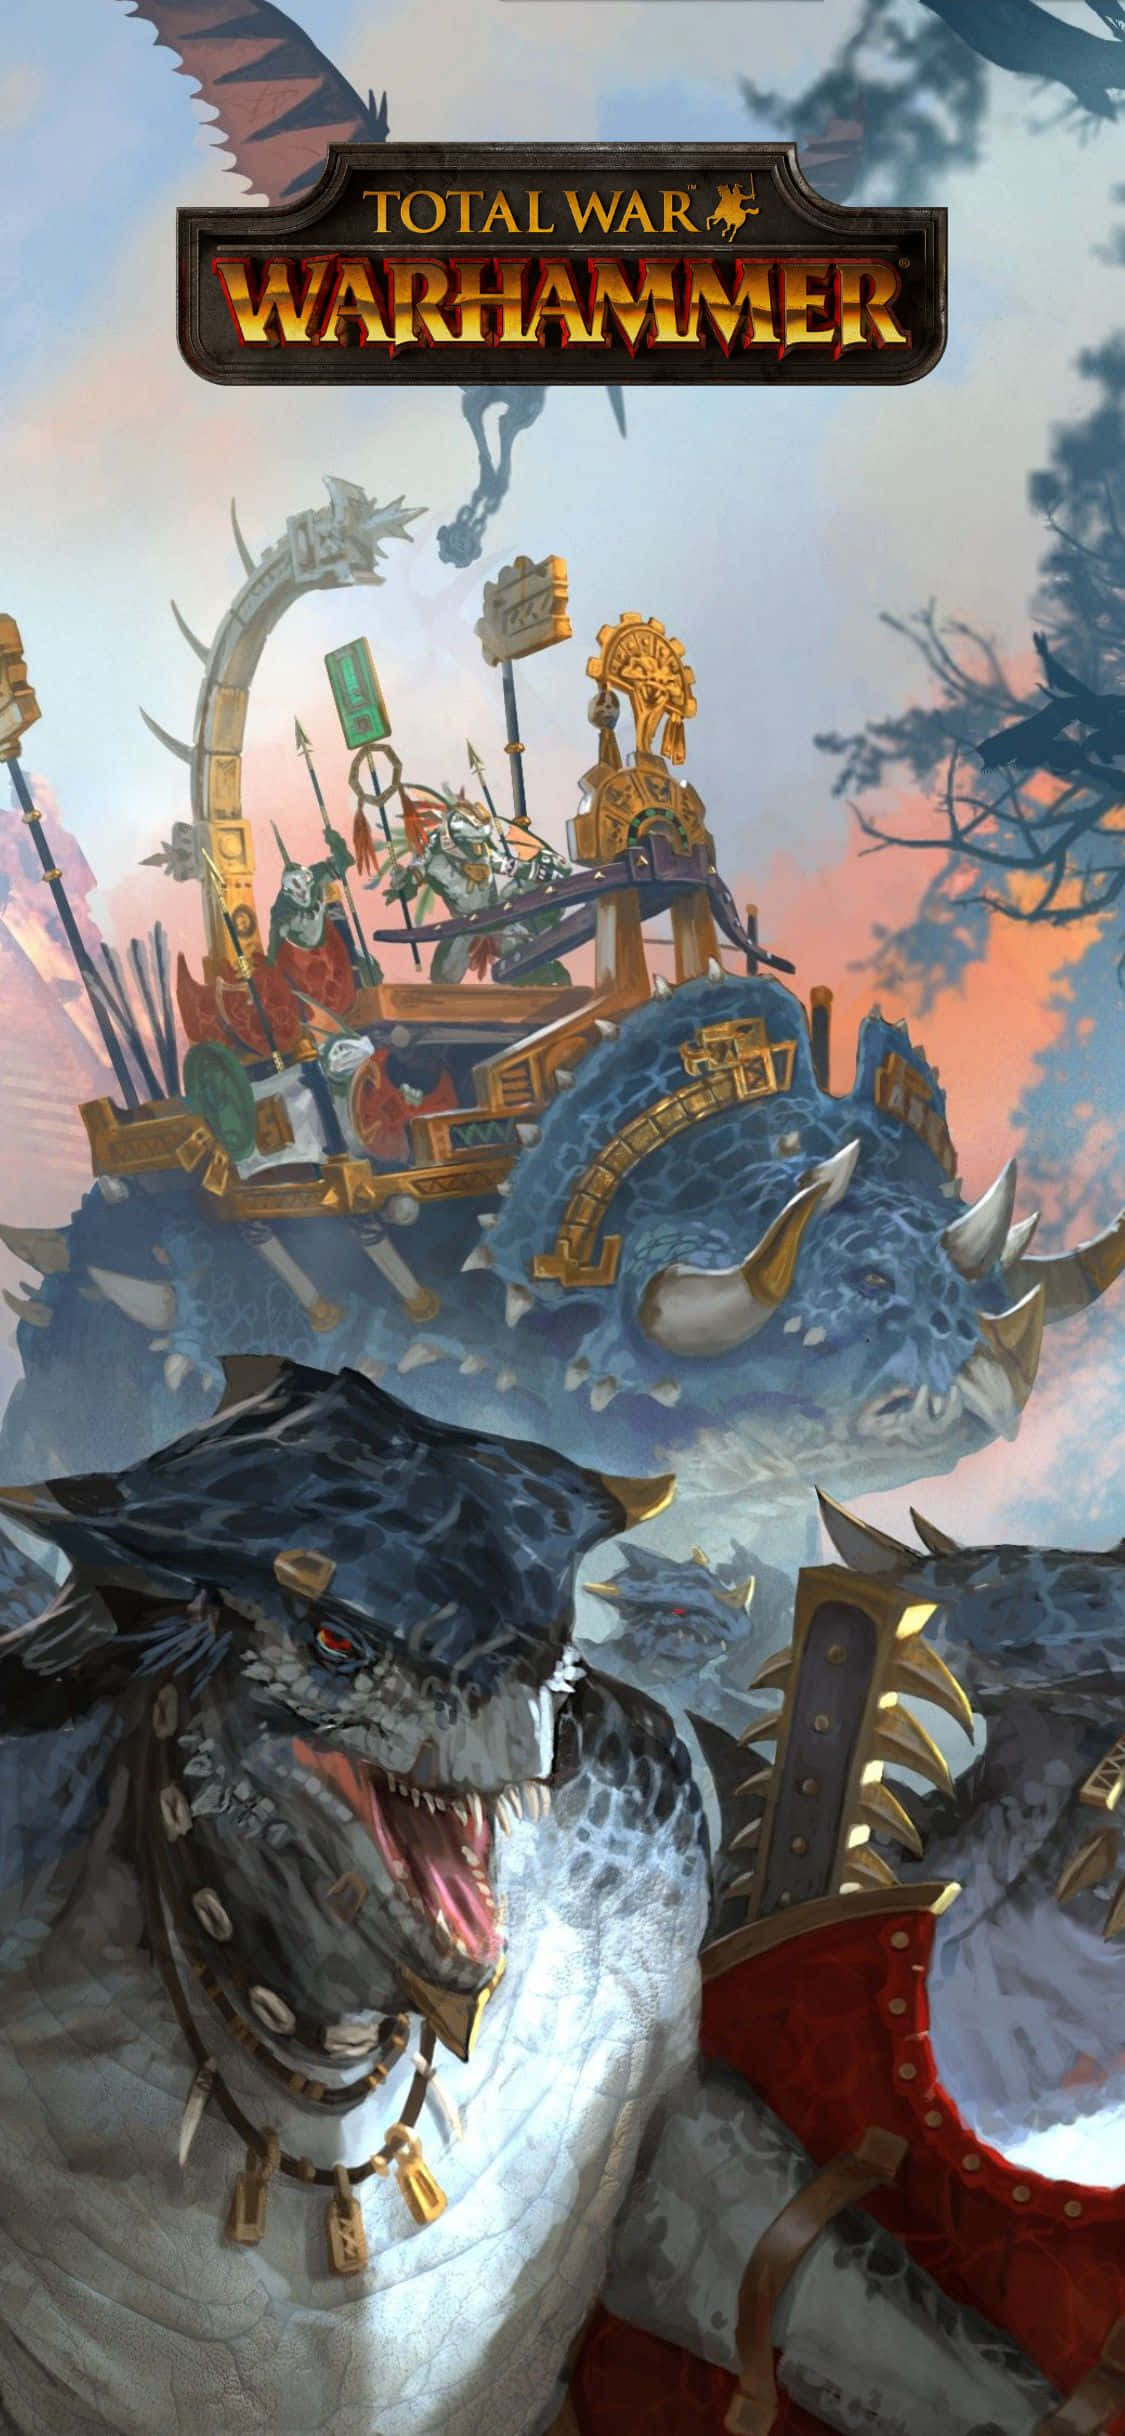 Explore the epic strategy game Total War: Warhammer on your iPhone X